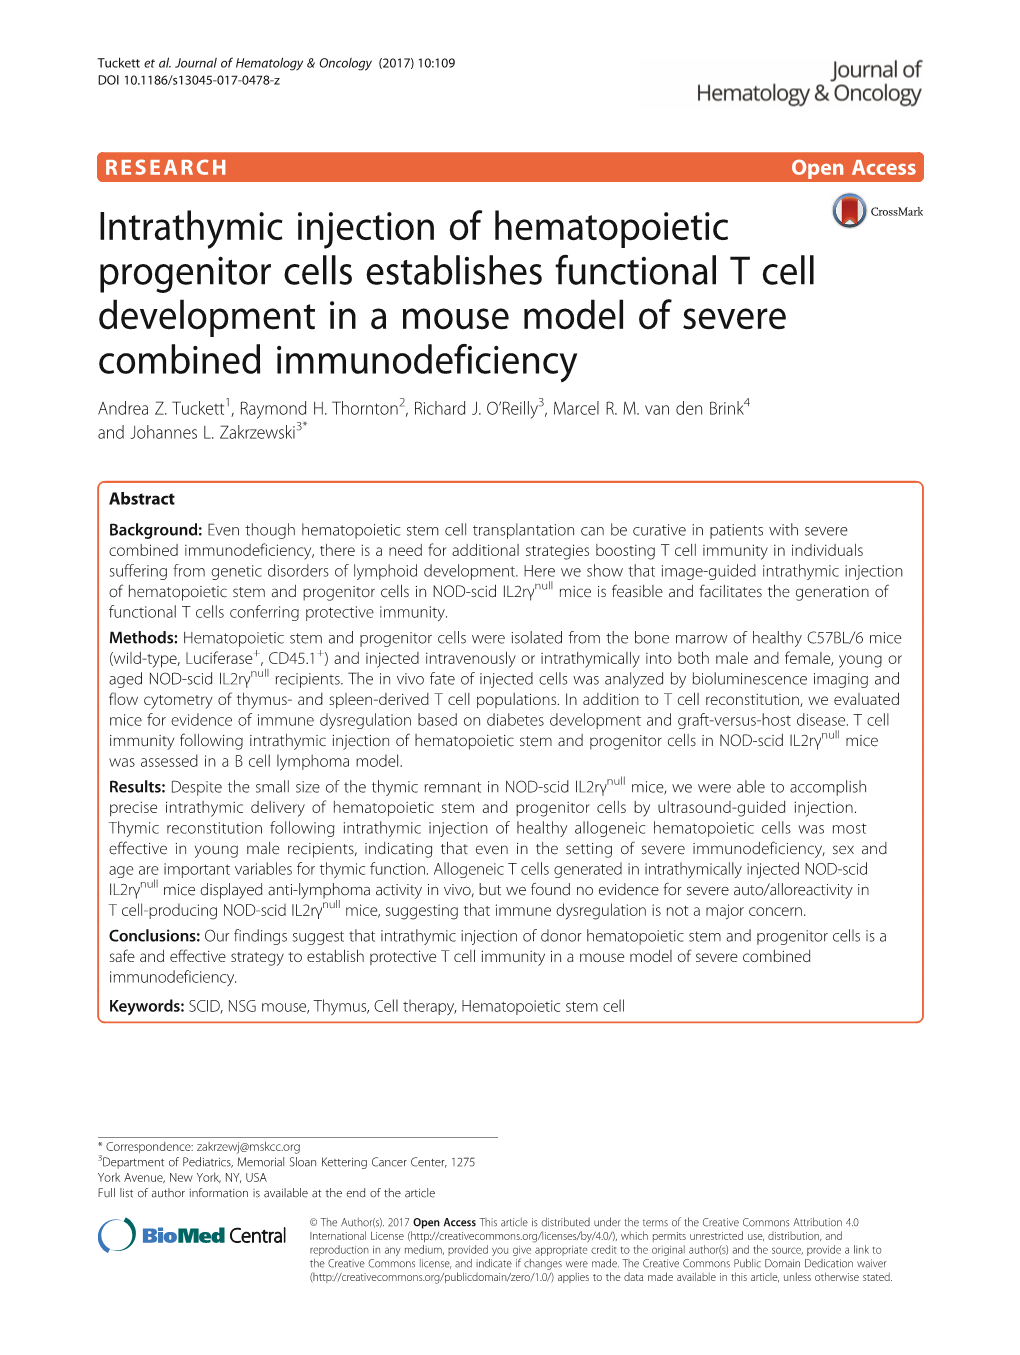 Intrathymic Injection of Hematopoietic Progenitor Cells Establishes Functional T Cell Development in a Mouse Model of Severe Combined Immunodeficiency Andrea Z